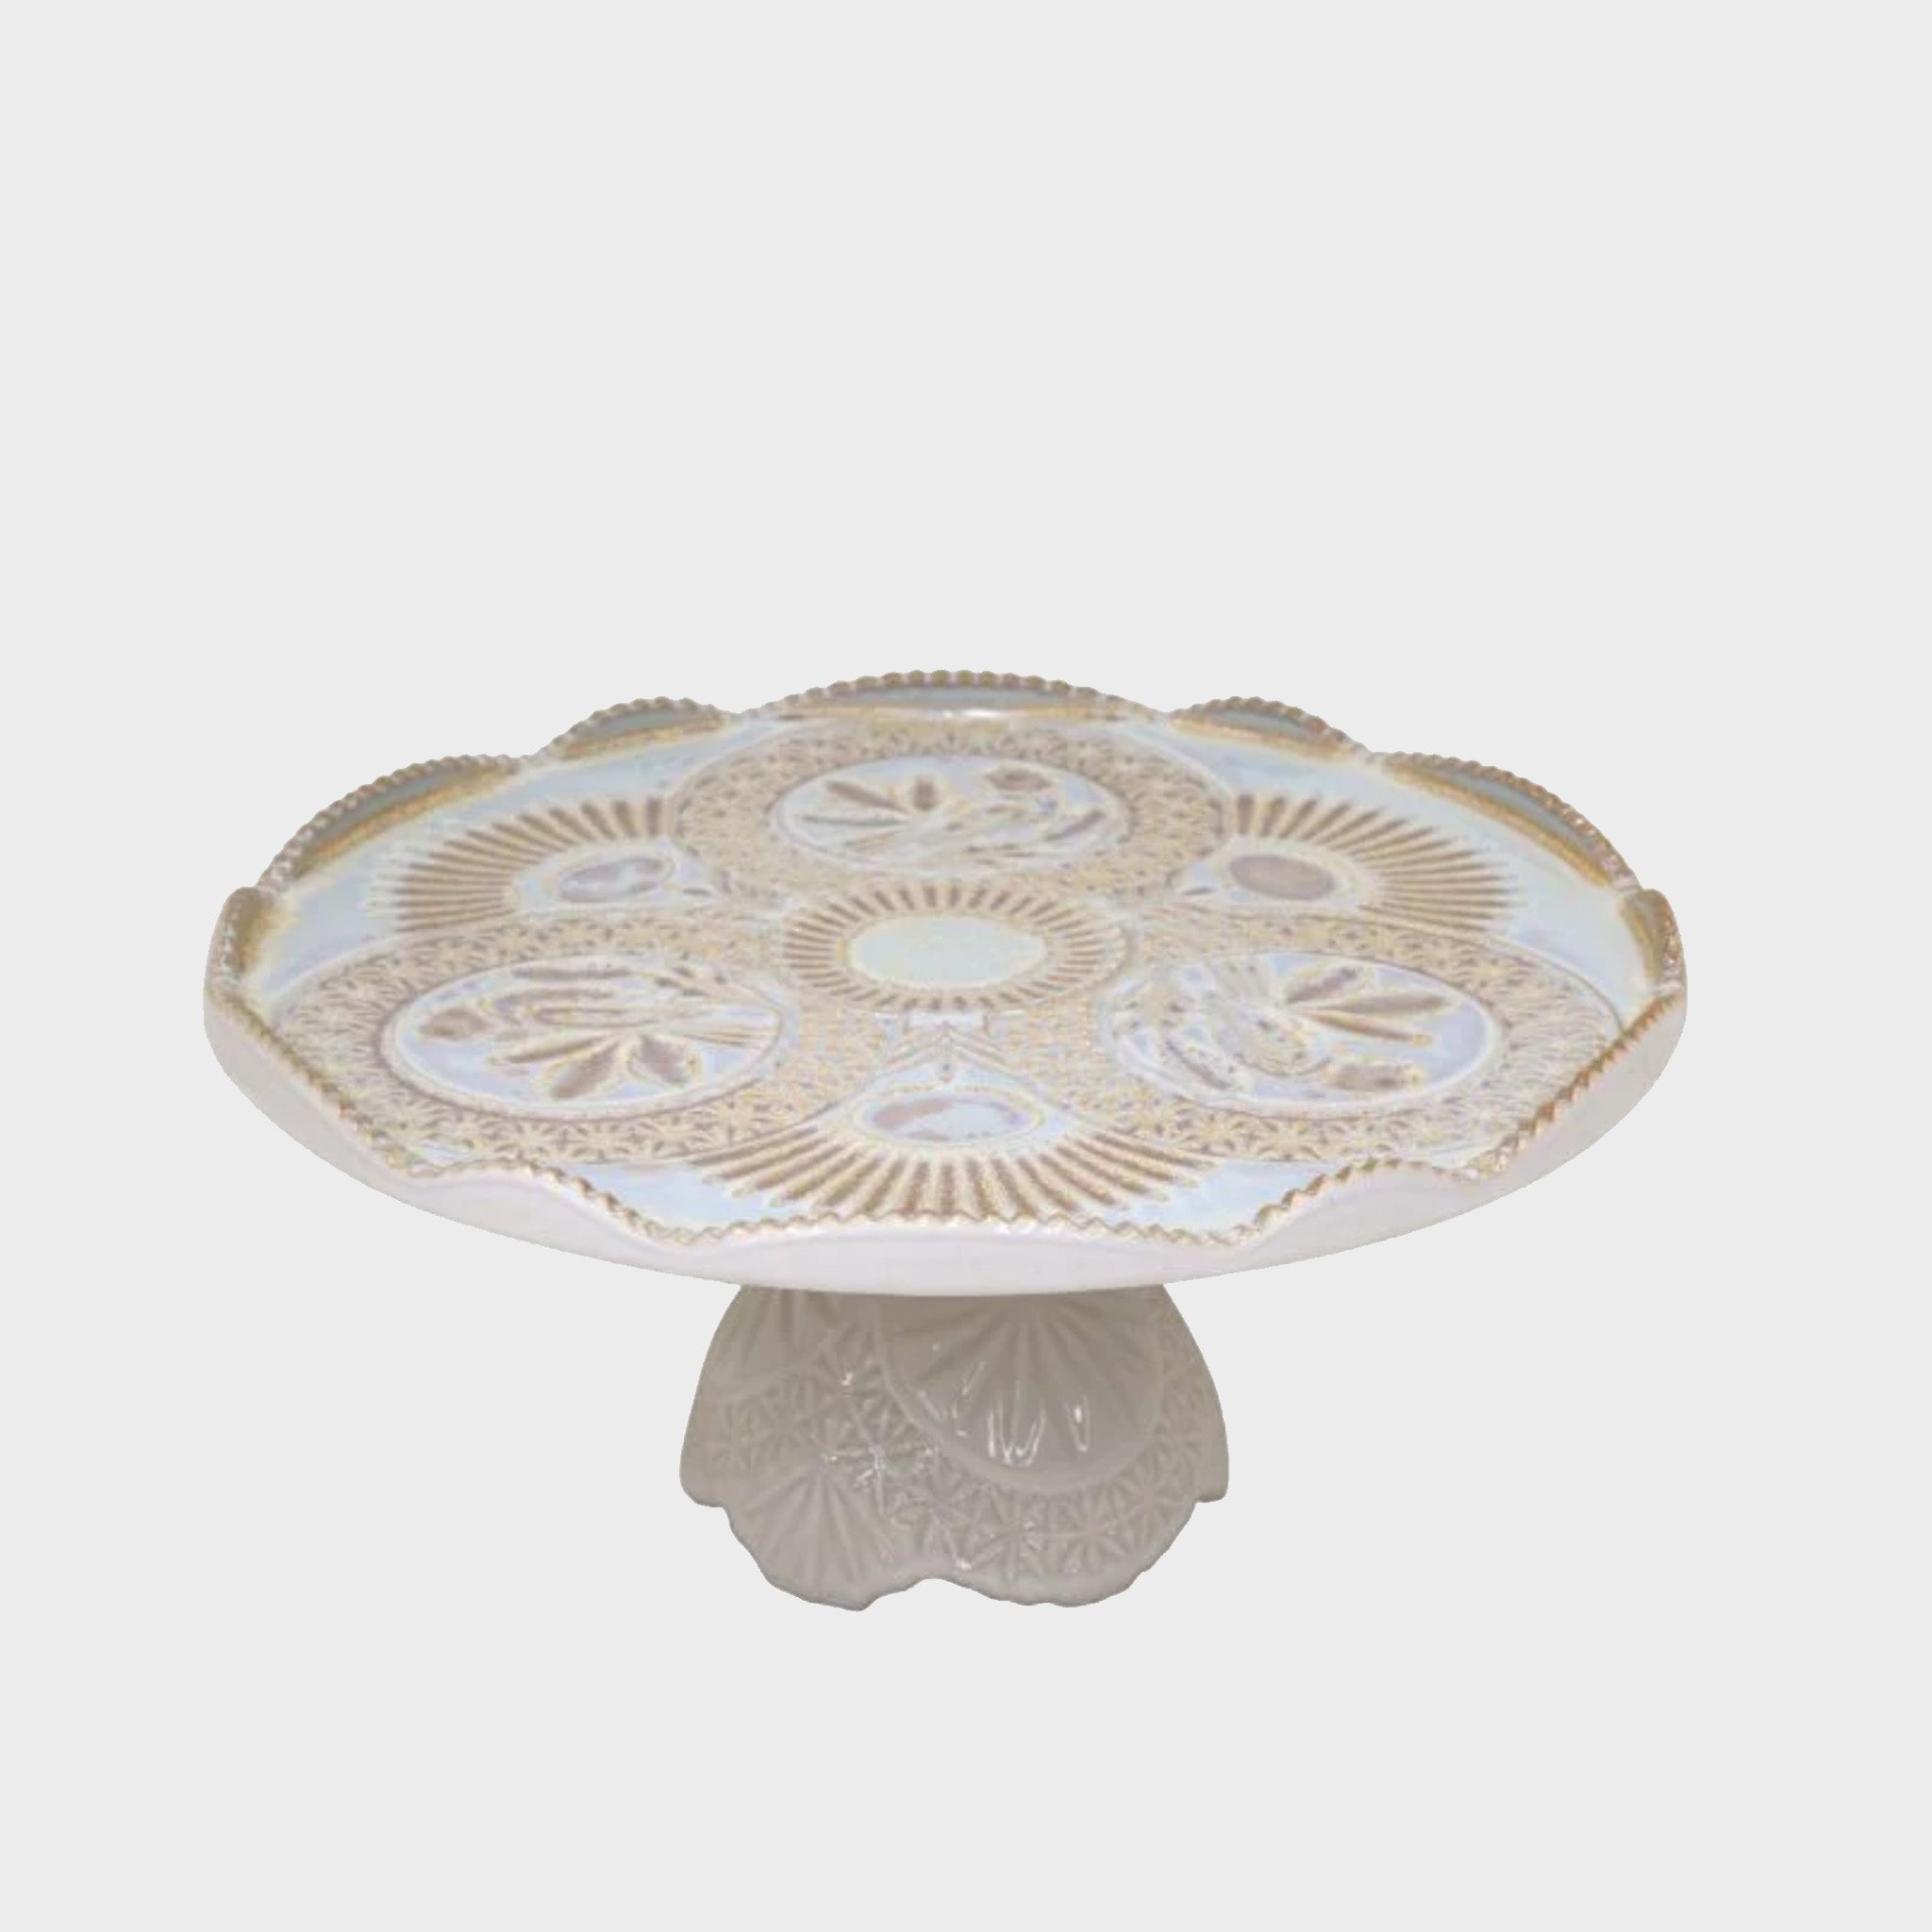 Cristal Nacar Footed Plate